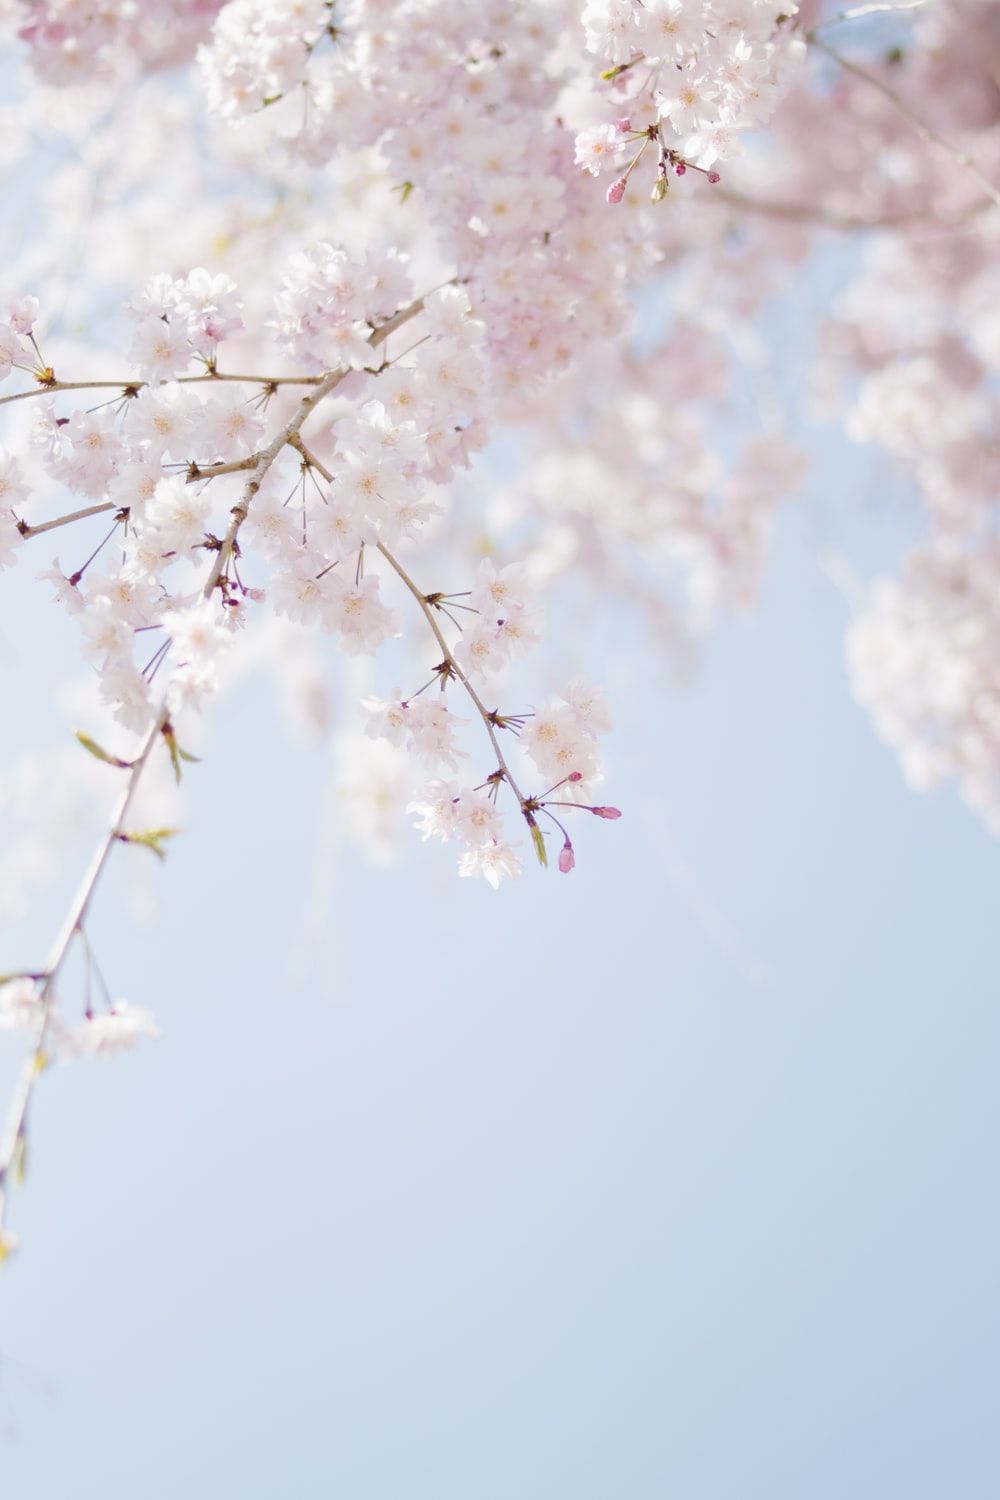 Blossom Picture. Download Free Image